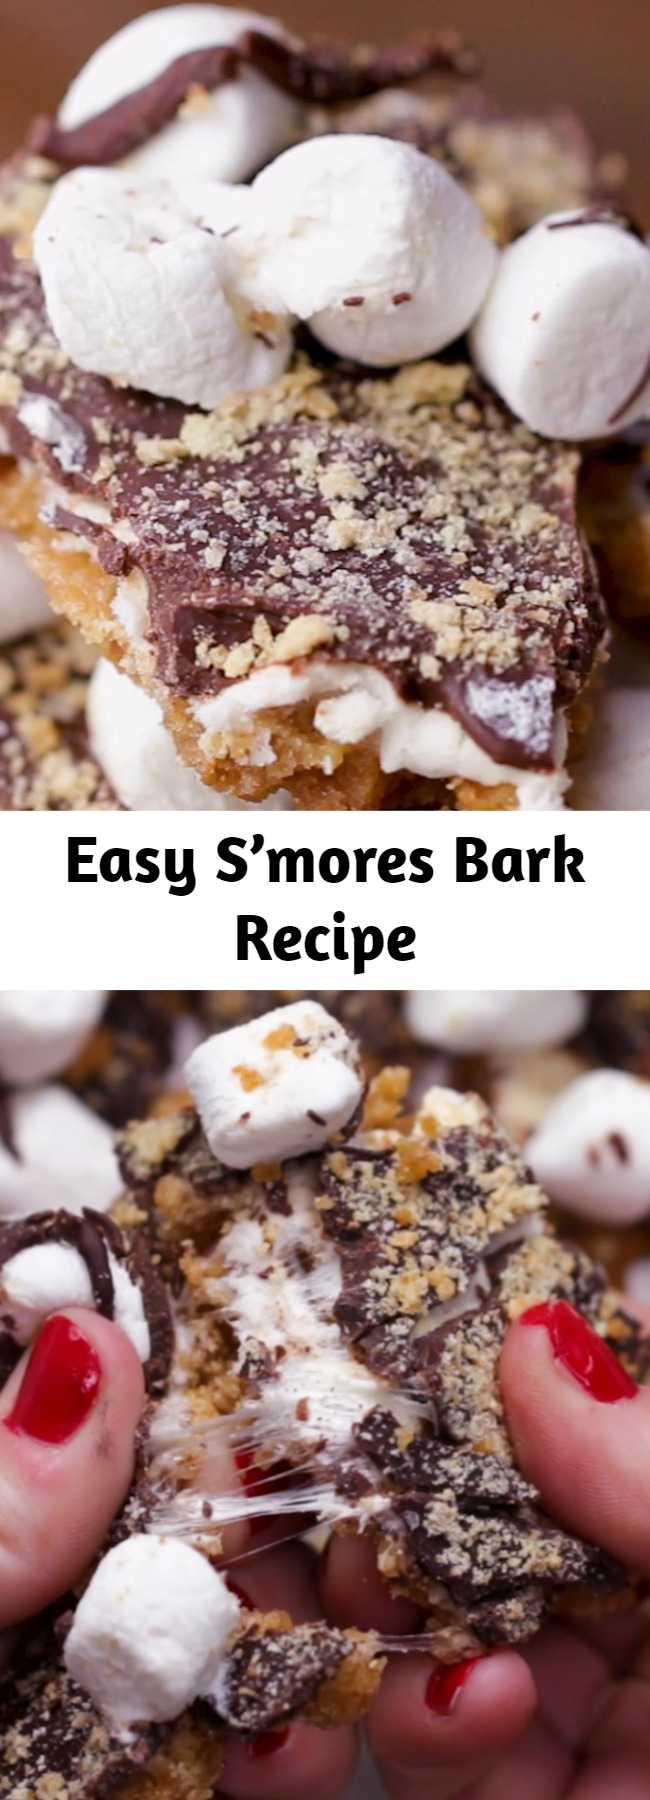 Easy S’mores Bark Recipe - This was a huge hit! It’s an great gif! You can really personalize it with crushed nuts or drizzled chocolate on top.